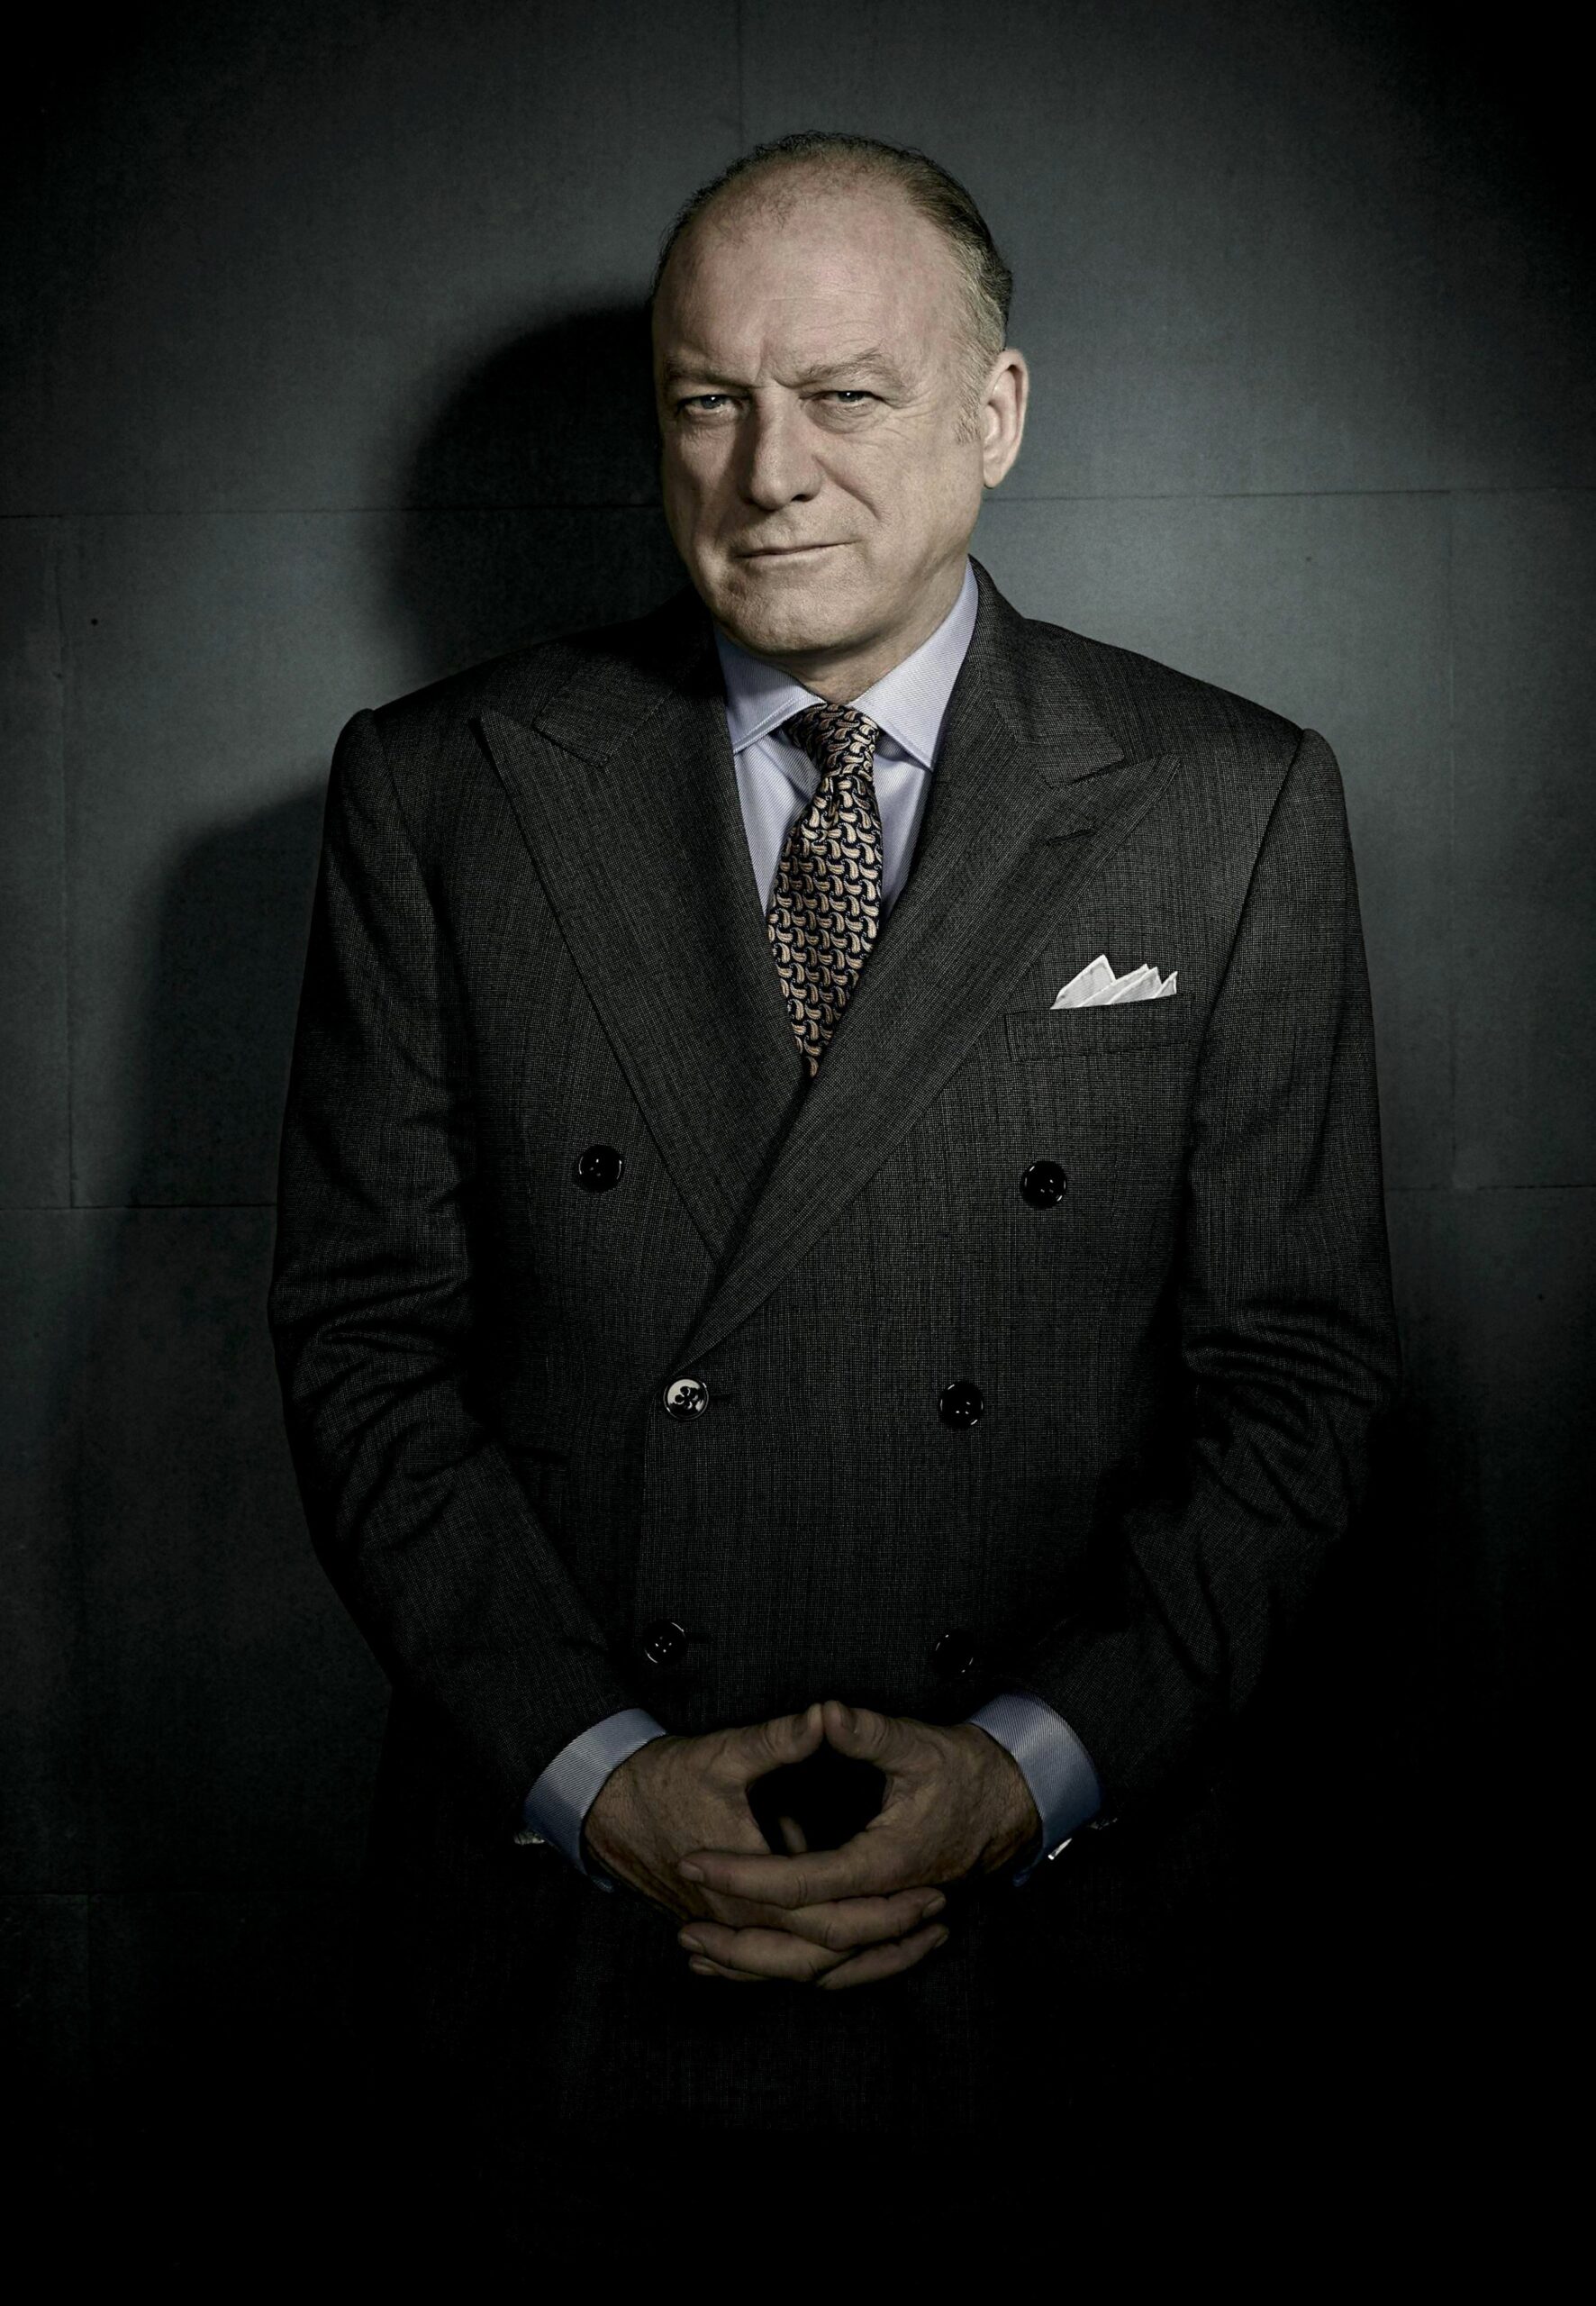 Falcone was a very important character in the Gotham TV series as well